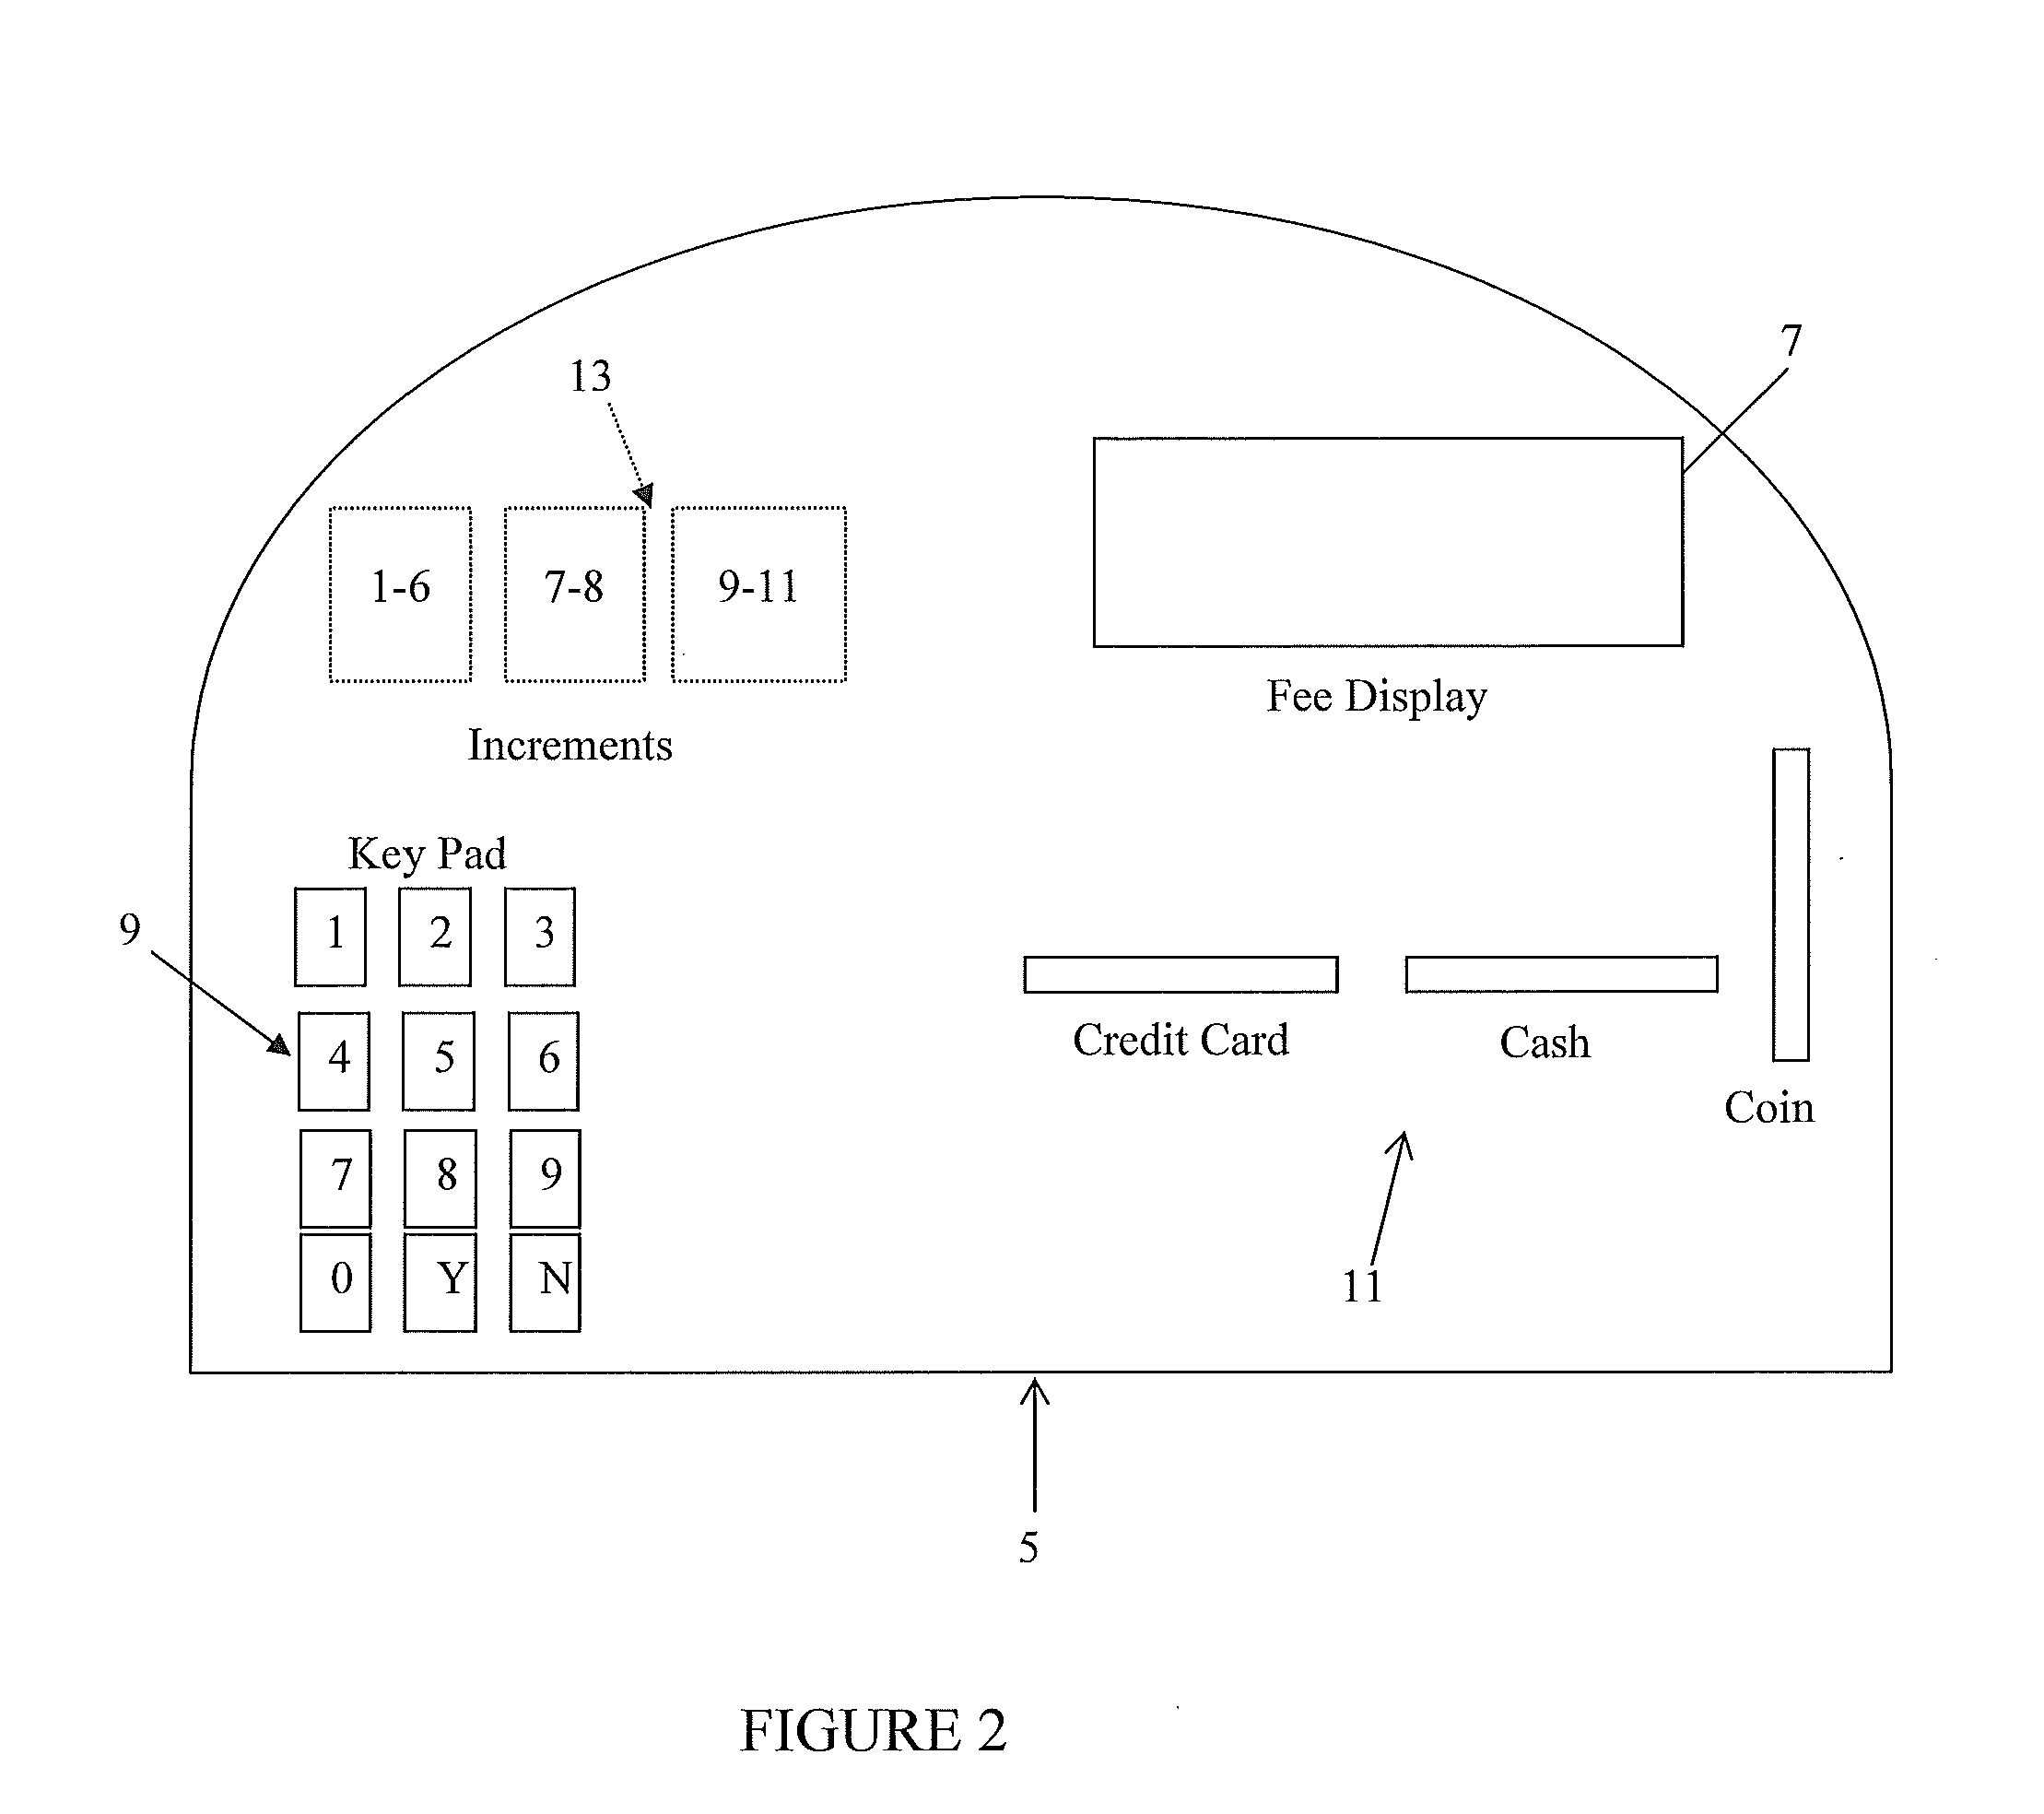 Method of Assessing Parking Fees Based Upon Vehicle Length